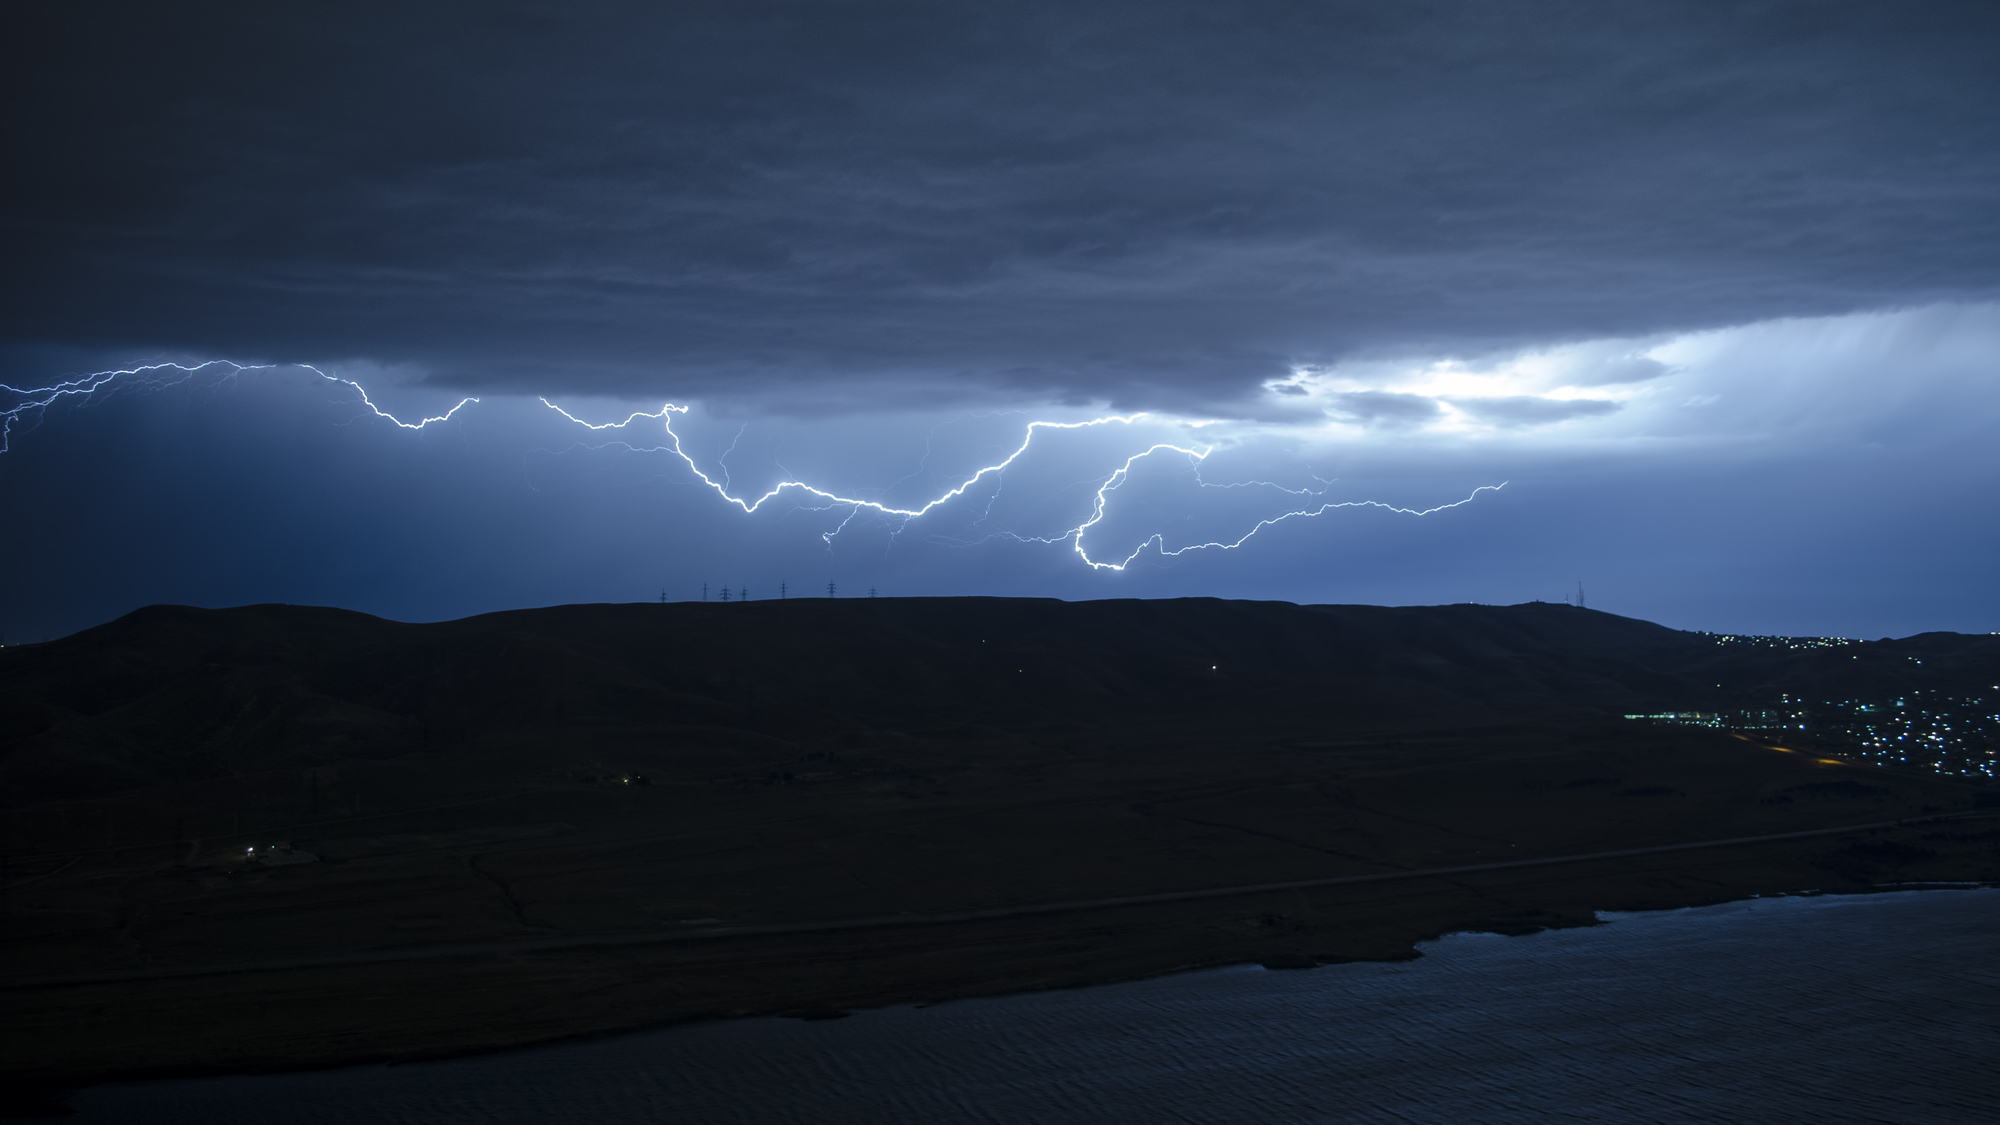 Swiss scientists successfully used lasers to divert lightning bolts